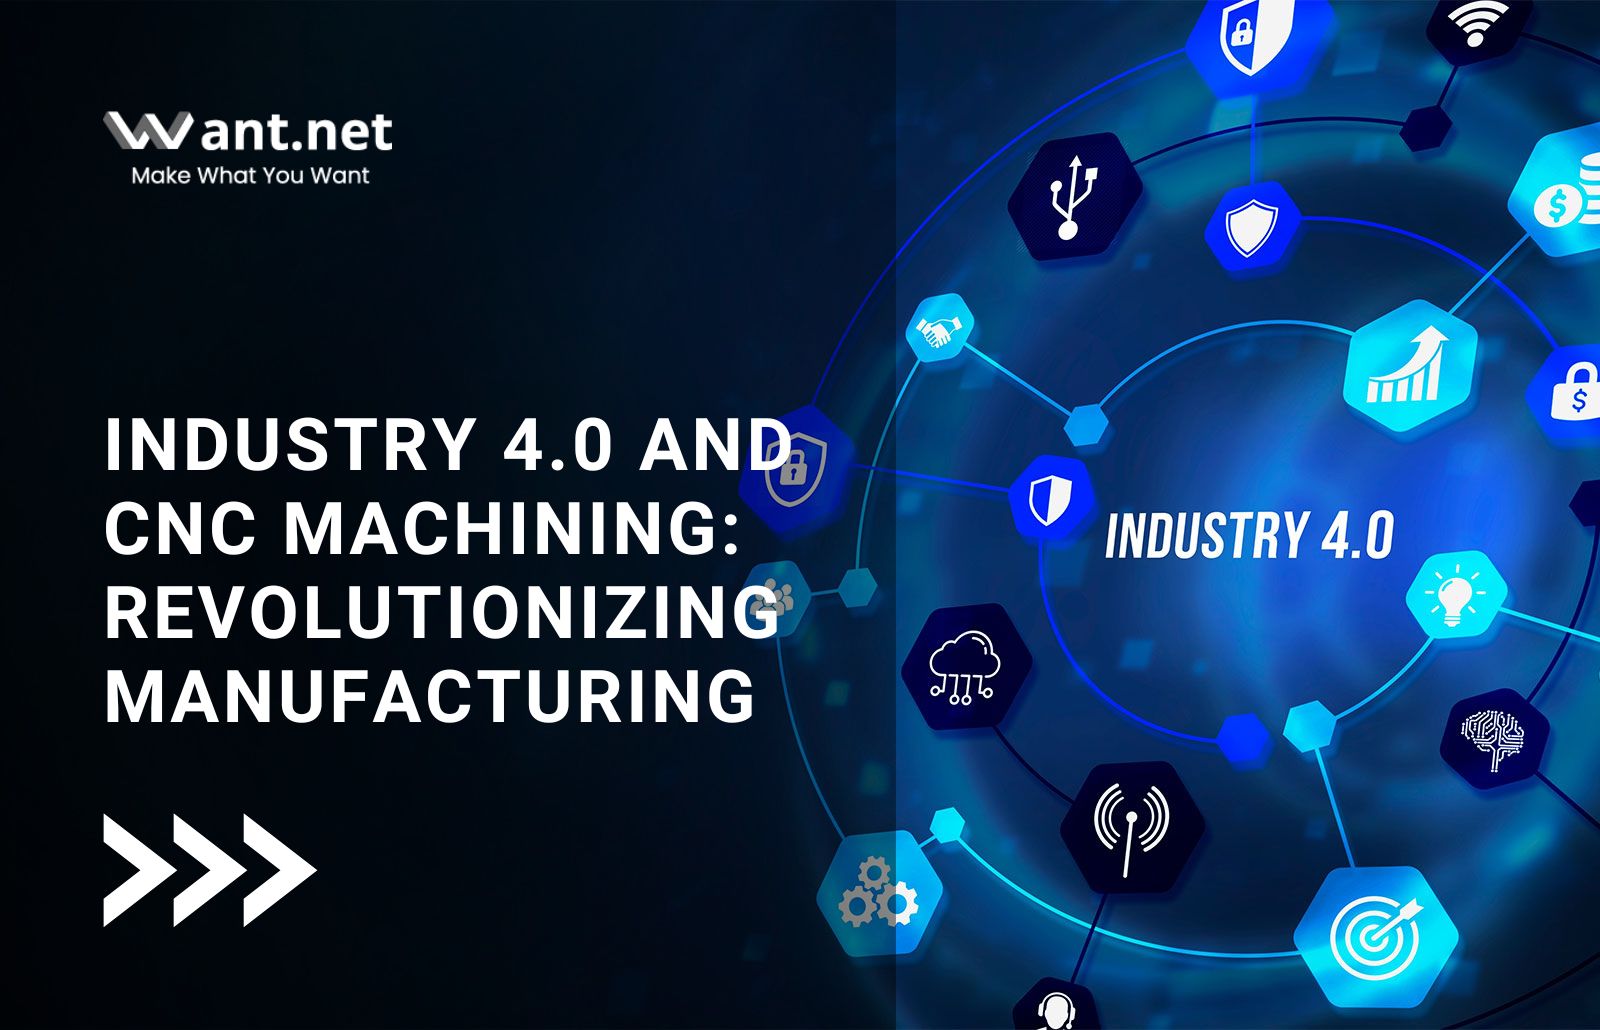 Industry 4.0 and CNC Machining